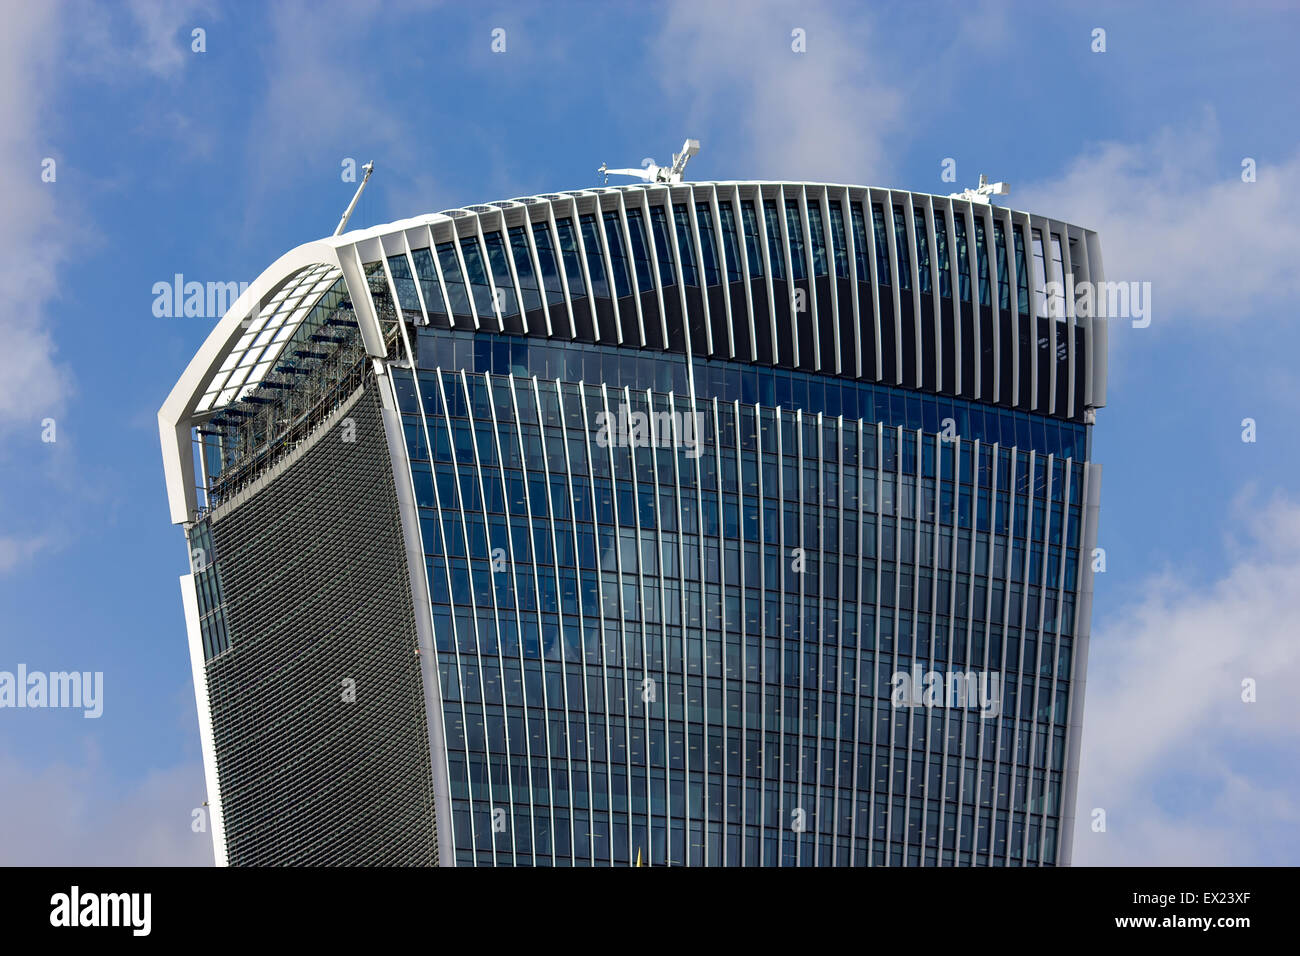 The 20 Fenchurch Street ' Walkie-Talkie' building is the 5th tallest building in London. Stock Photo